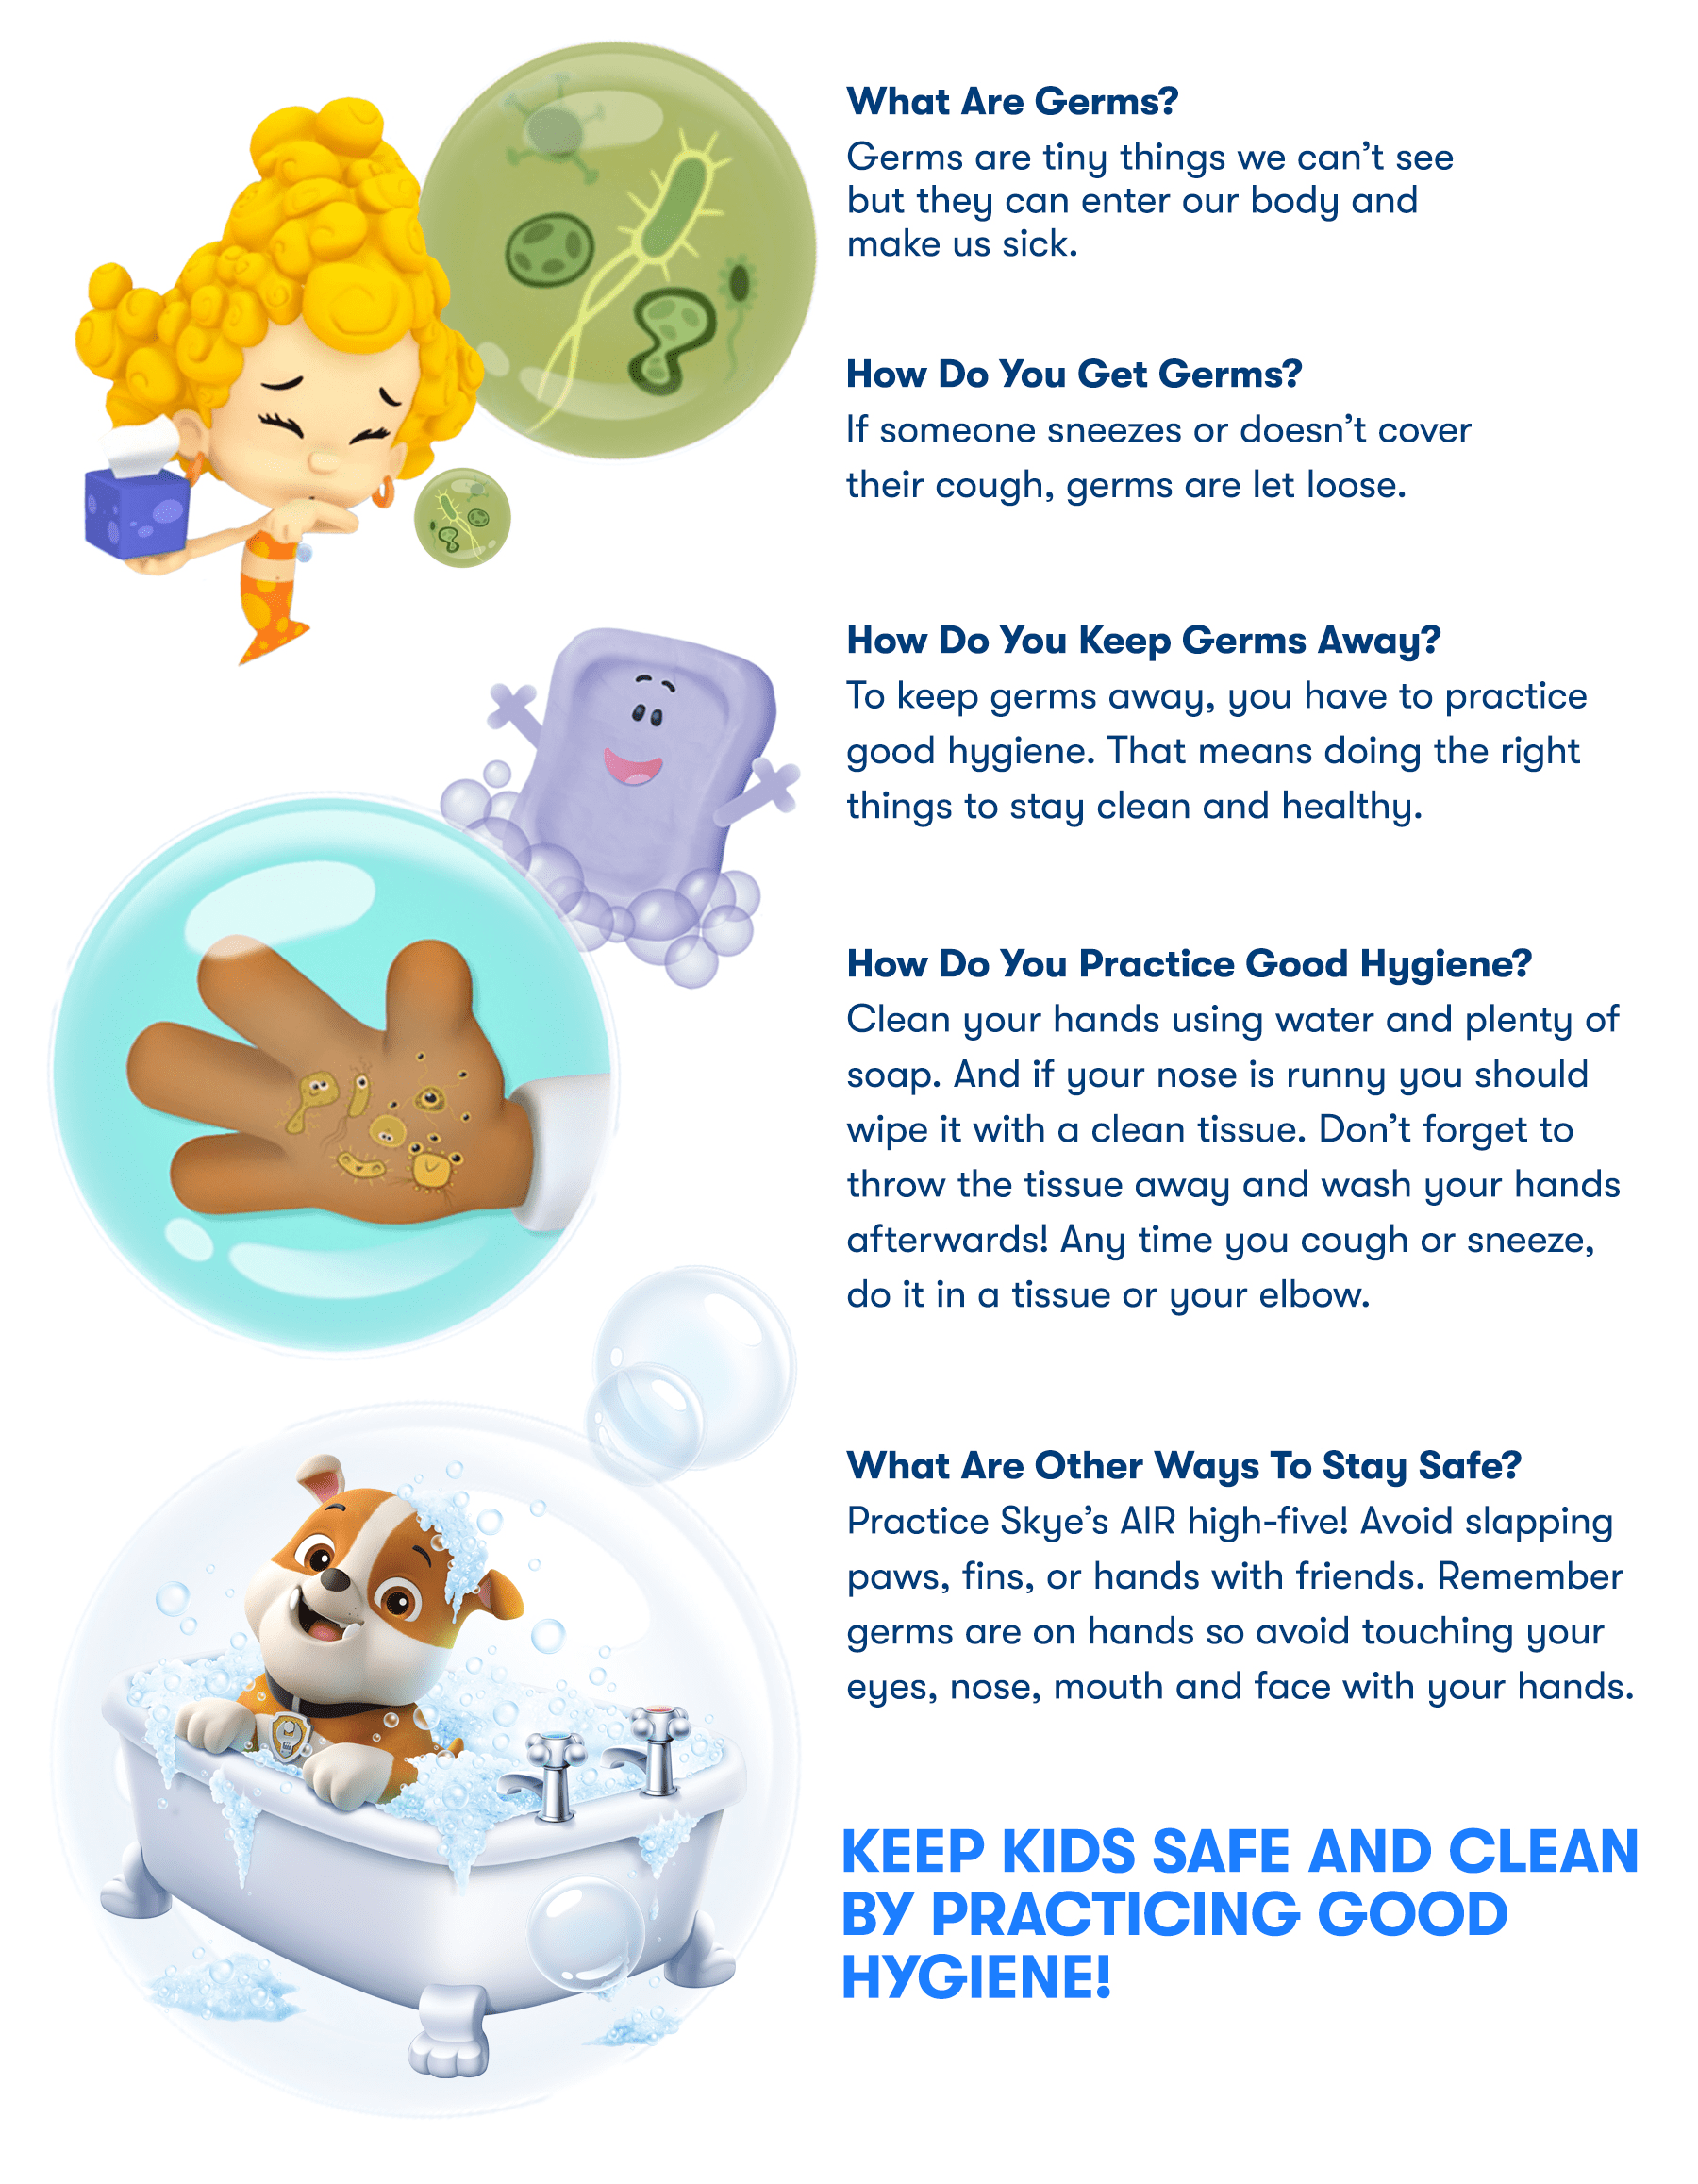 Kid-Friendly Ways to Talk About Germs